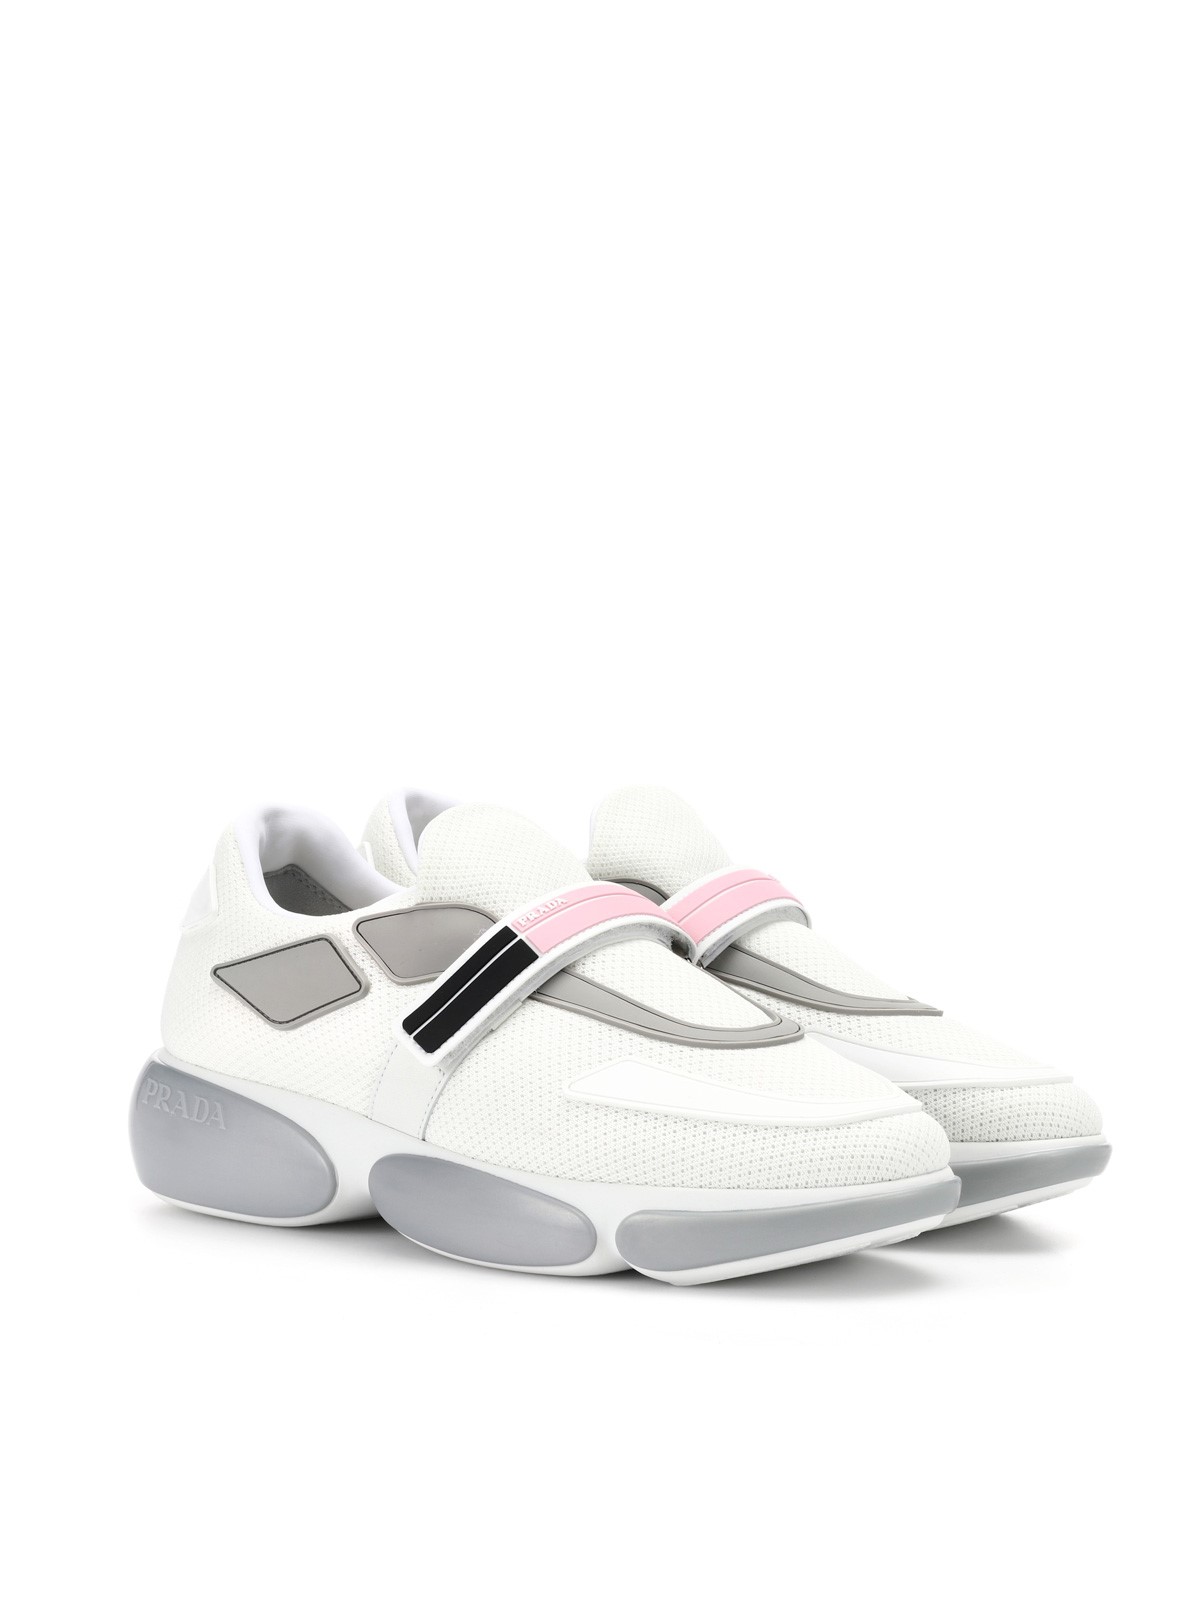 prada CLOUDBUST SNEAKERS available on www.strongerinc.org - 21287